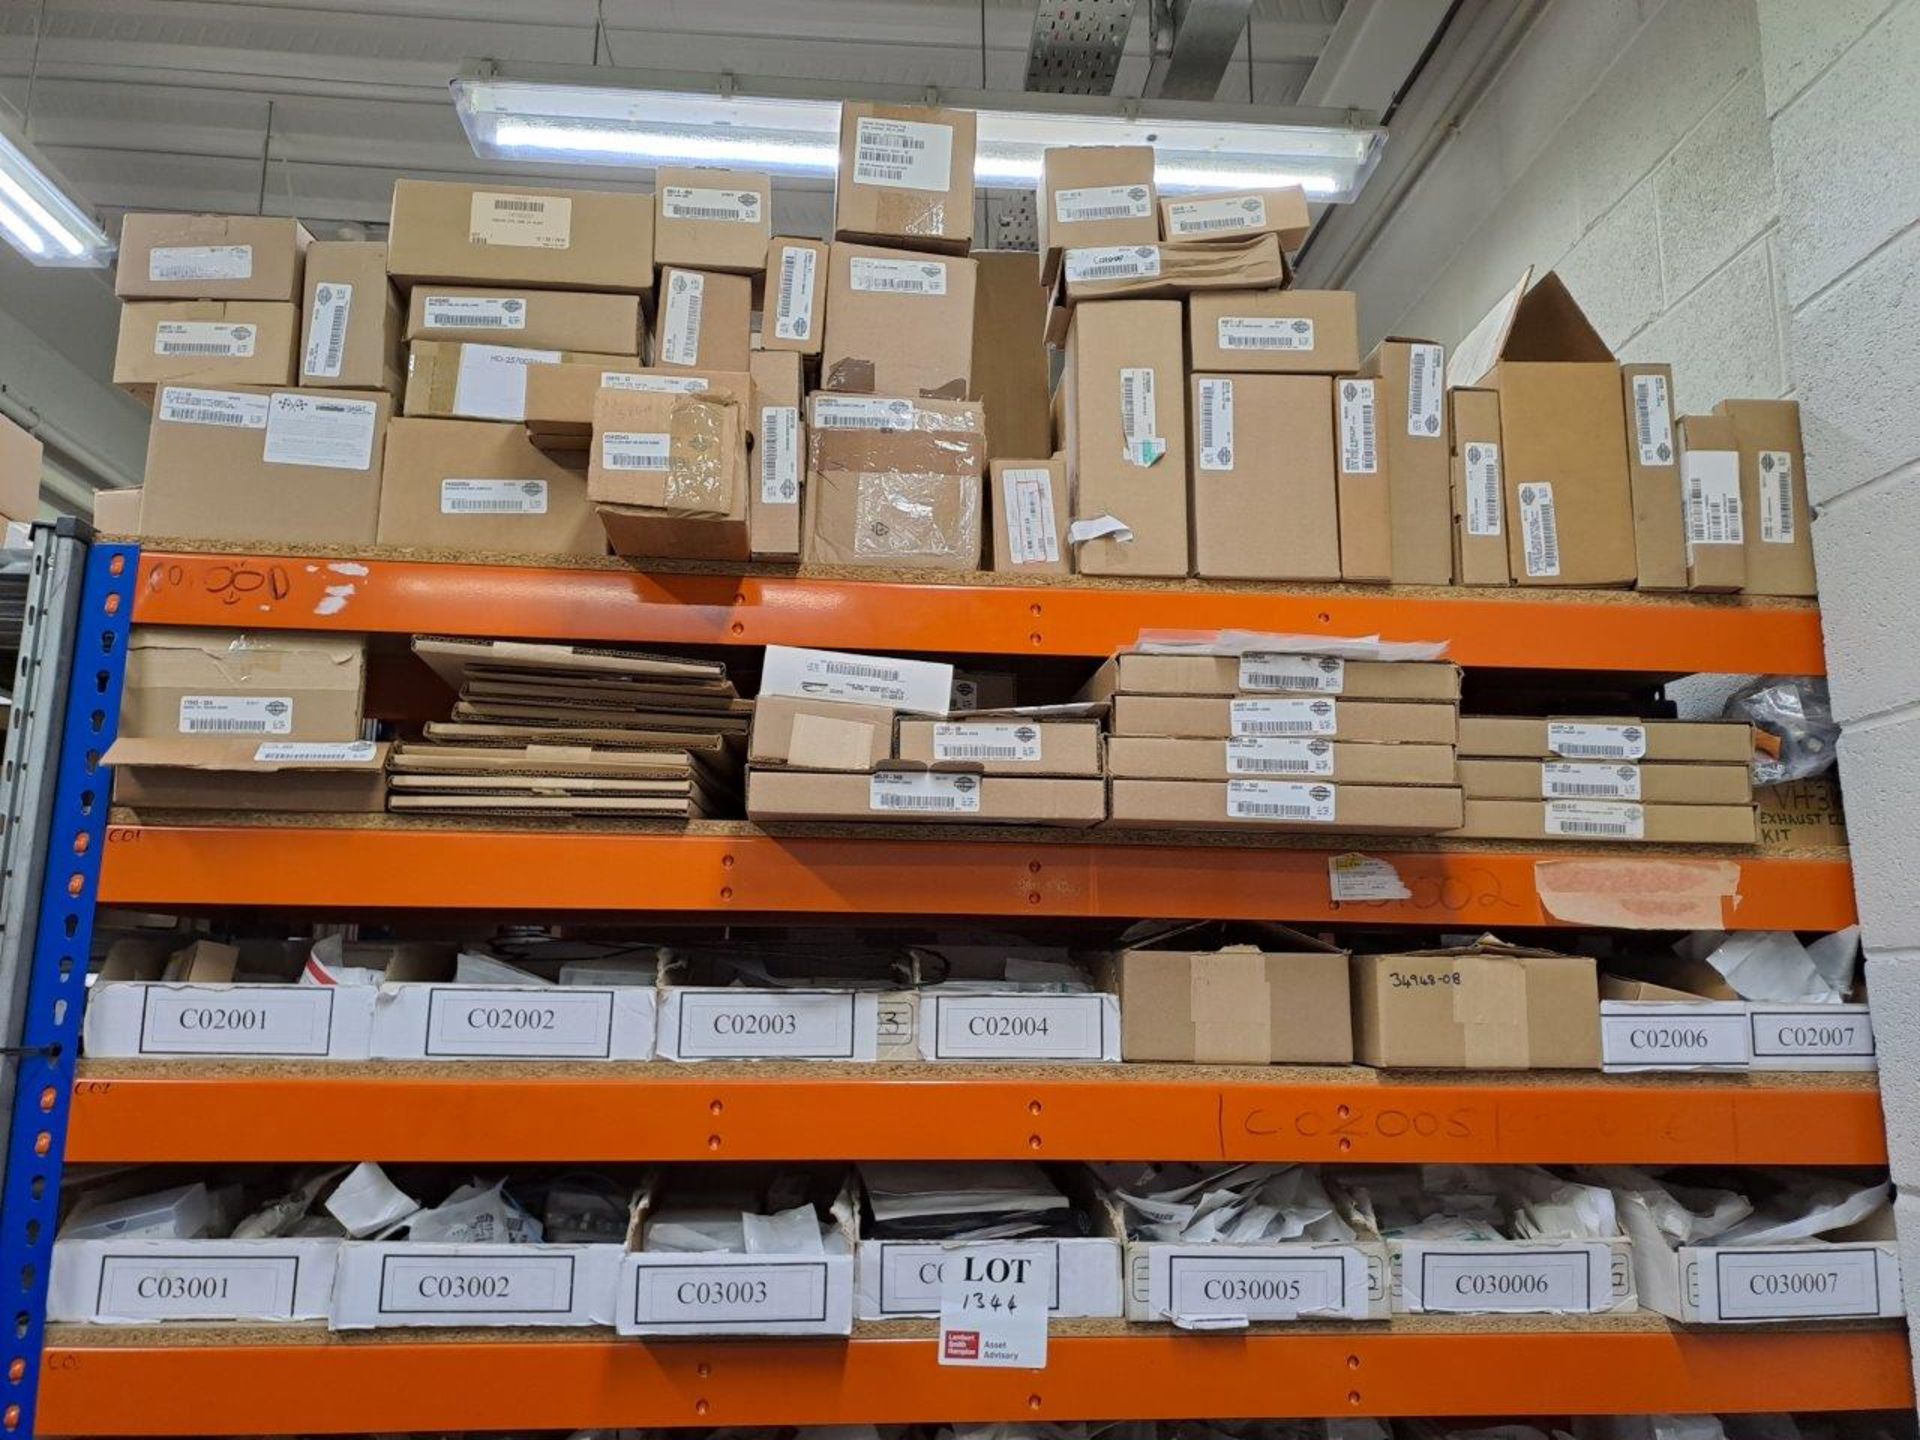 Quantity of Harley Davidson parts, to 4 shelves as pictured